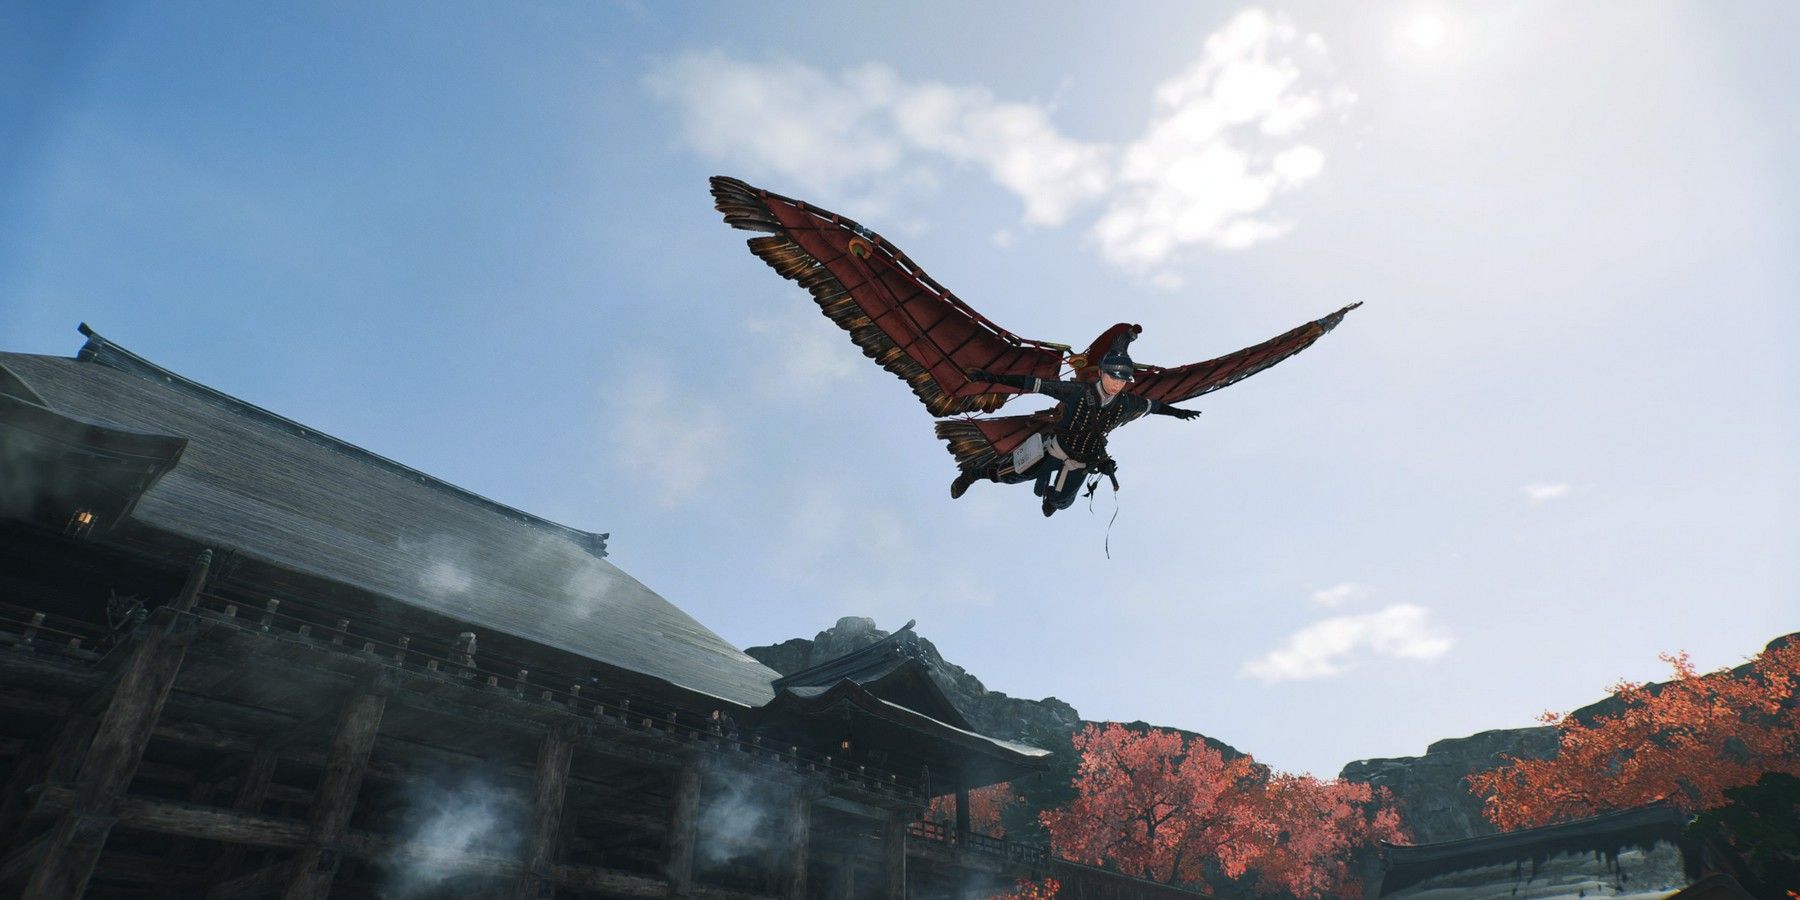 Rise of the Ronin Dive of the Ronin Trophy Guide (Glided From the Elevated Deck at Kiyomizudera Temple)